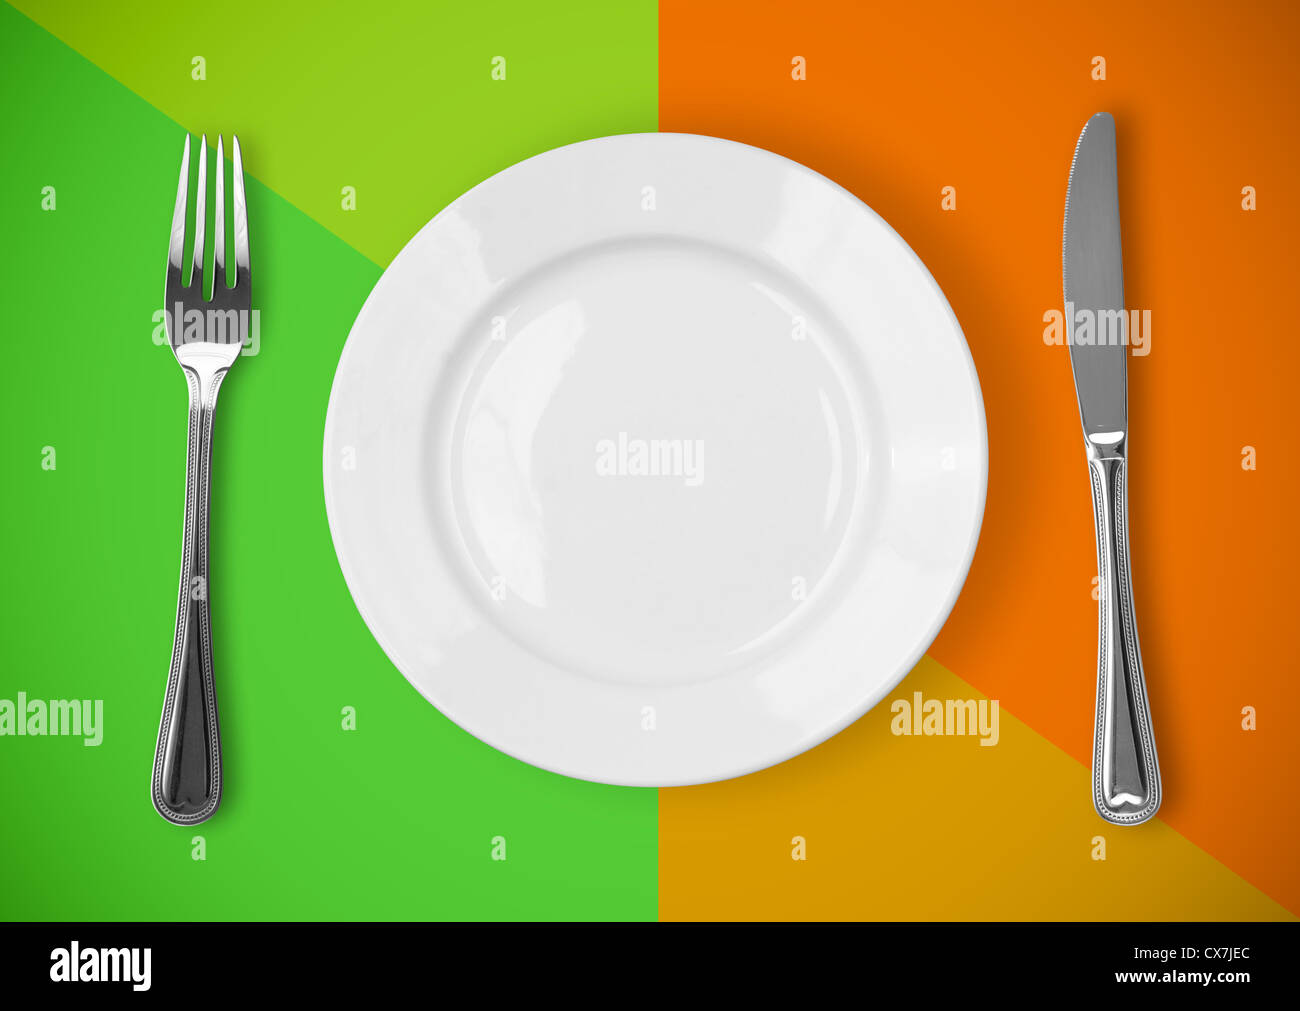 Knife, plate and fork on colorful background Stock Photo